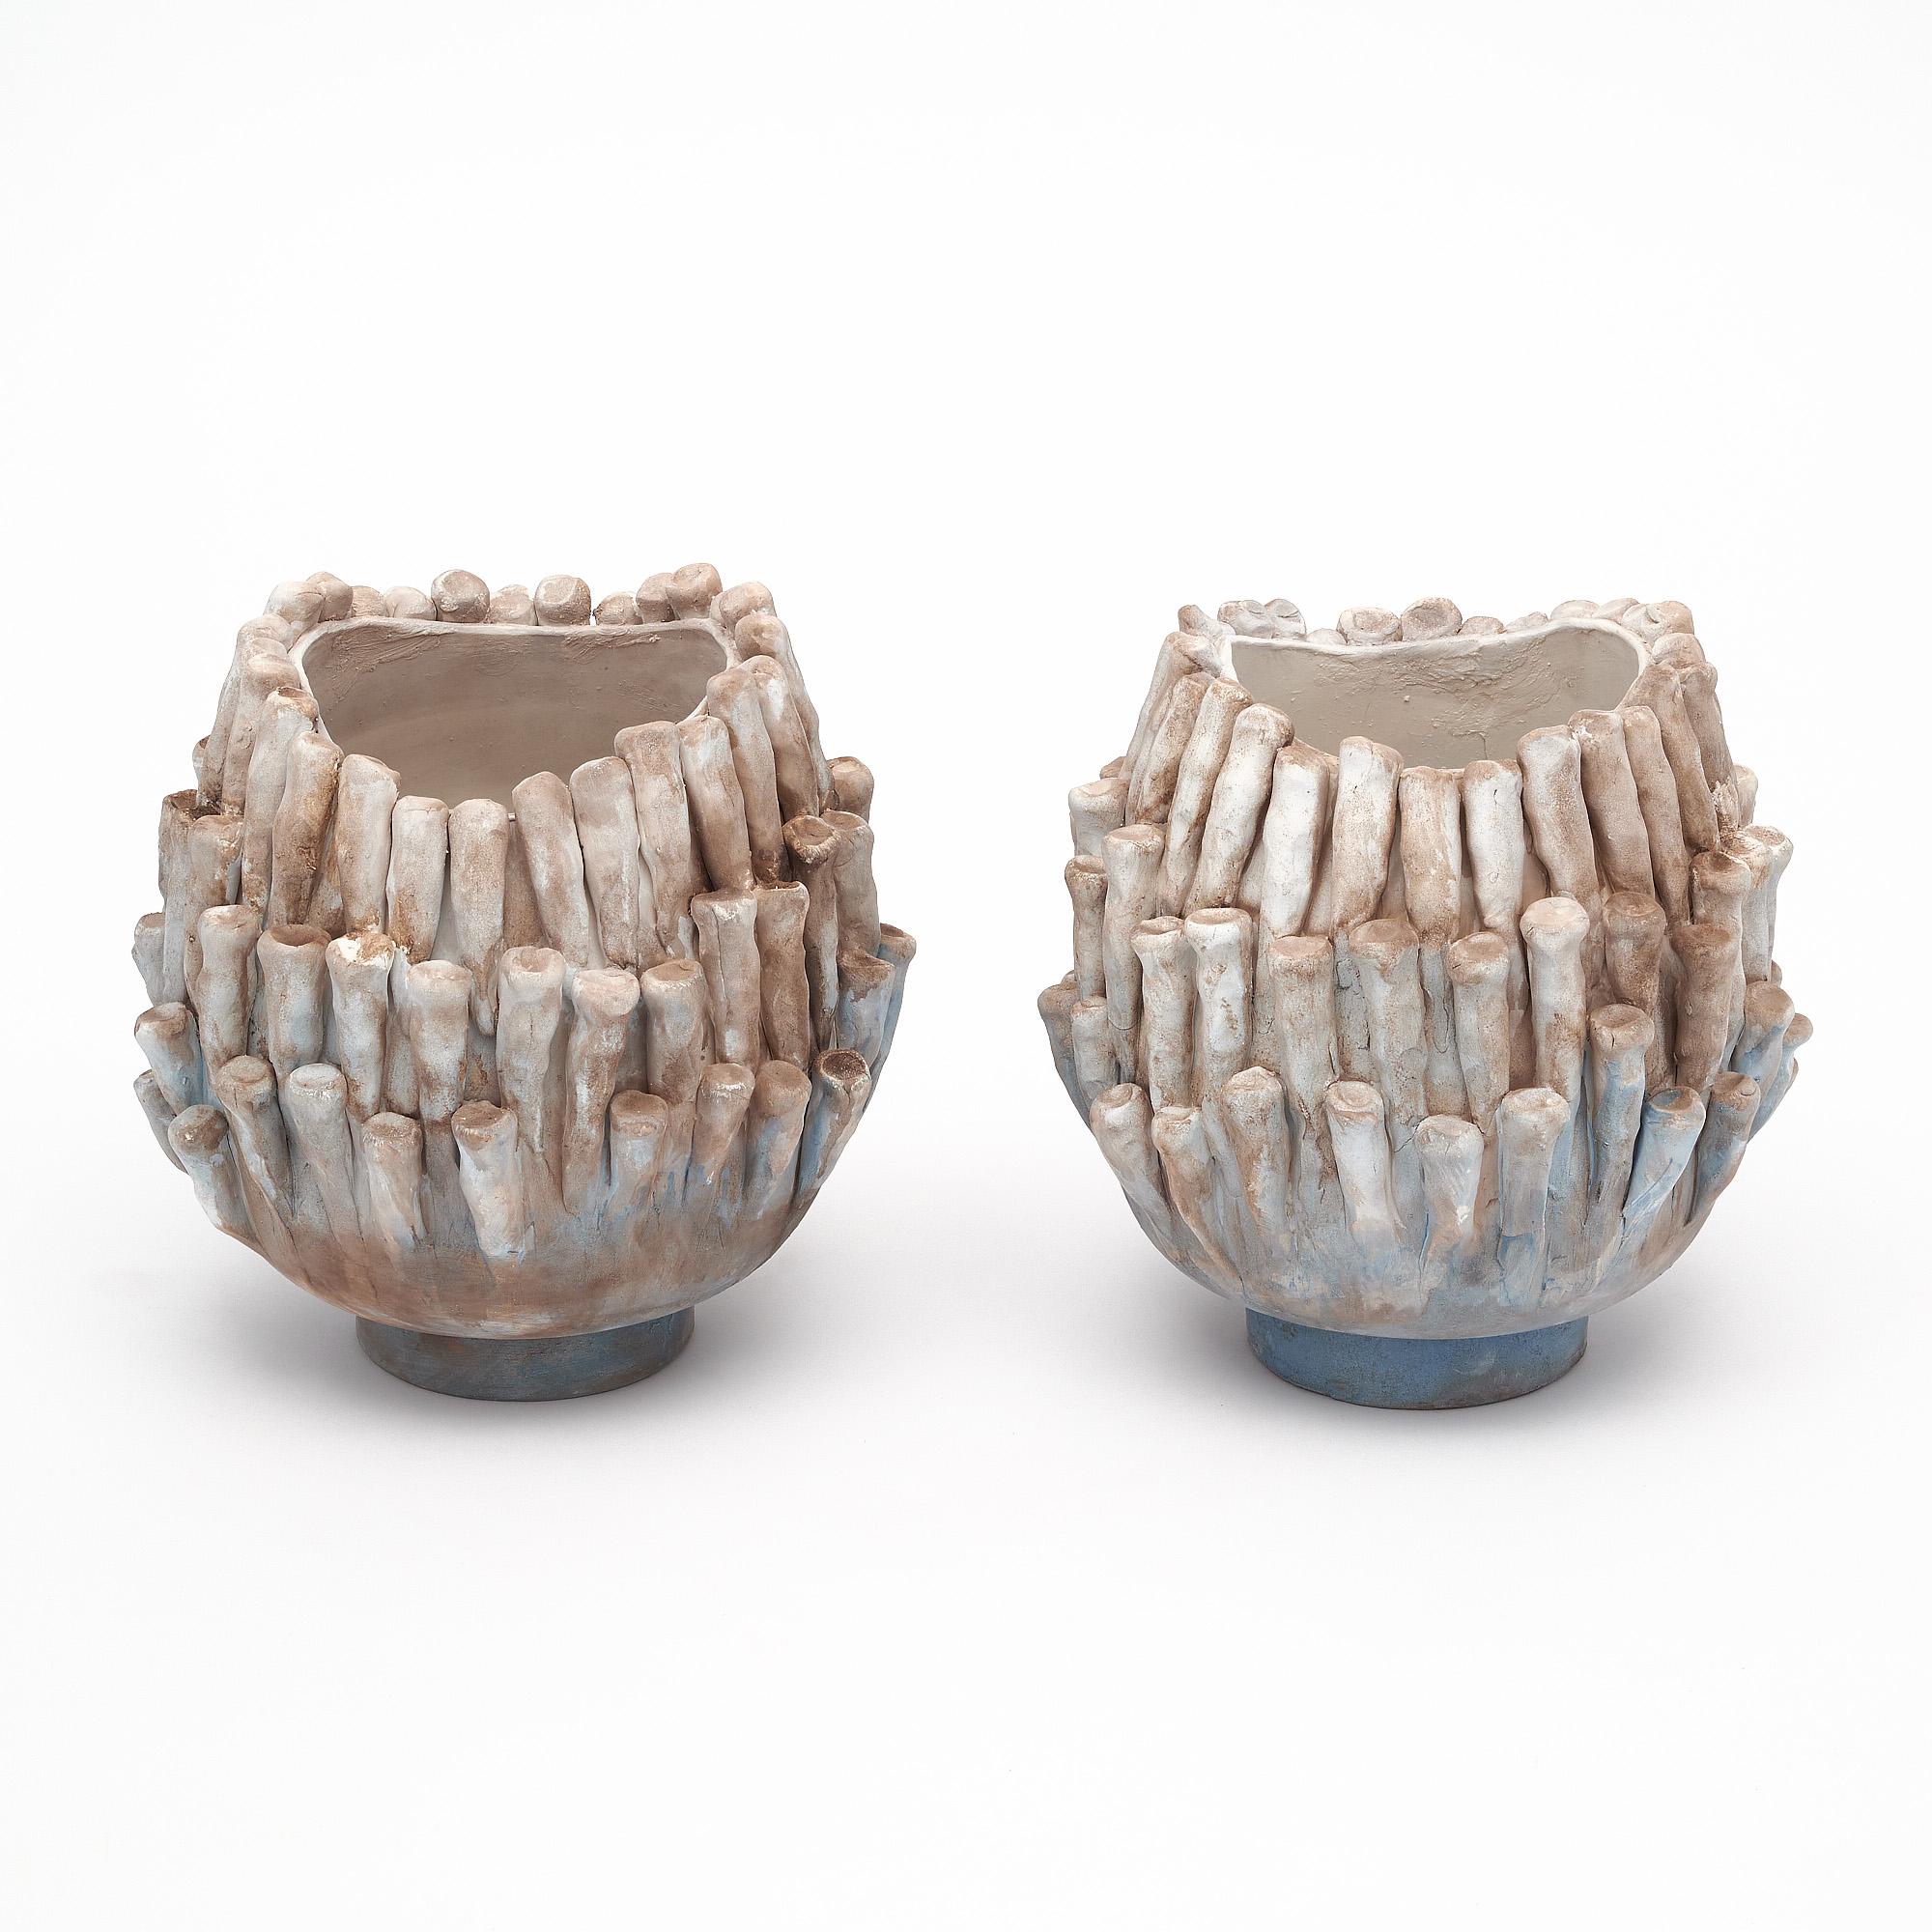 Pair of ceramic vases from Vallauris, France. The vases feature elements reminiscent of coral and have a striking organic appearance. The finish features tones of terracotta, blue, and cream.